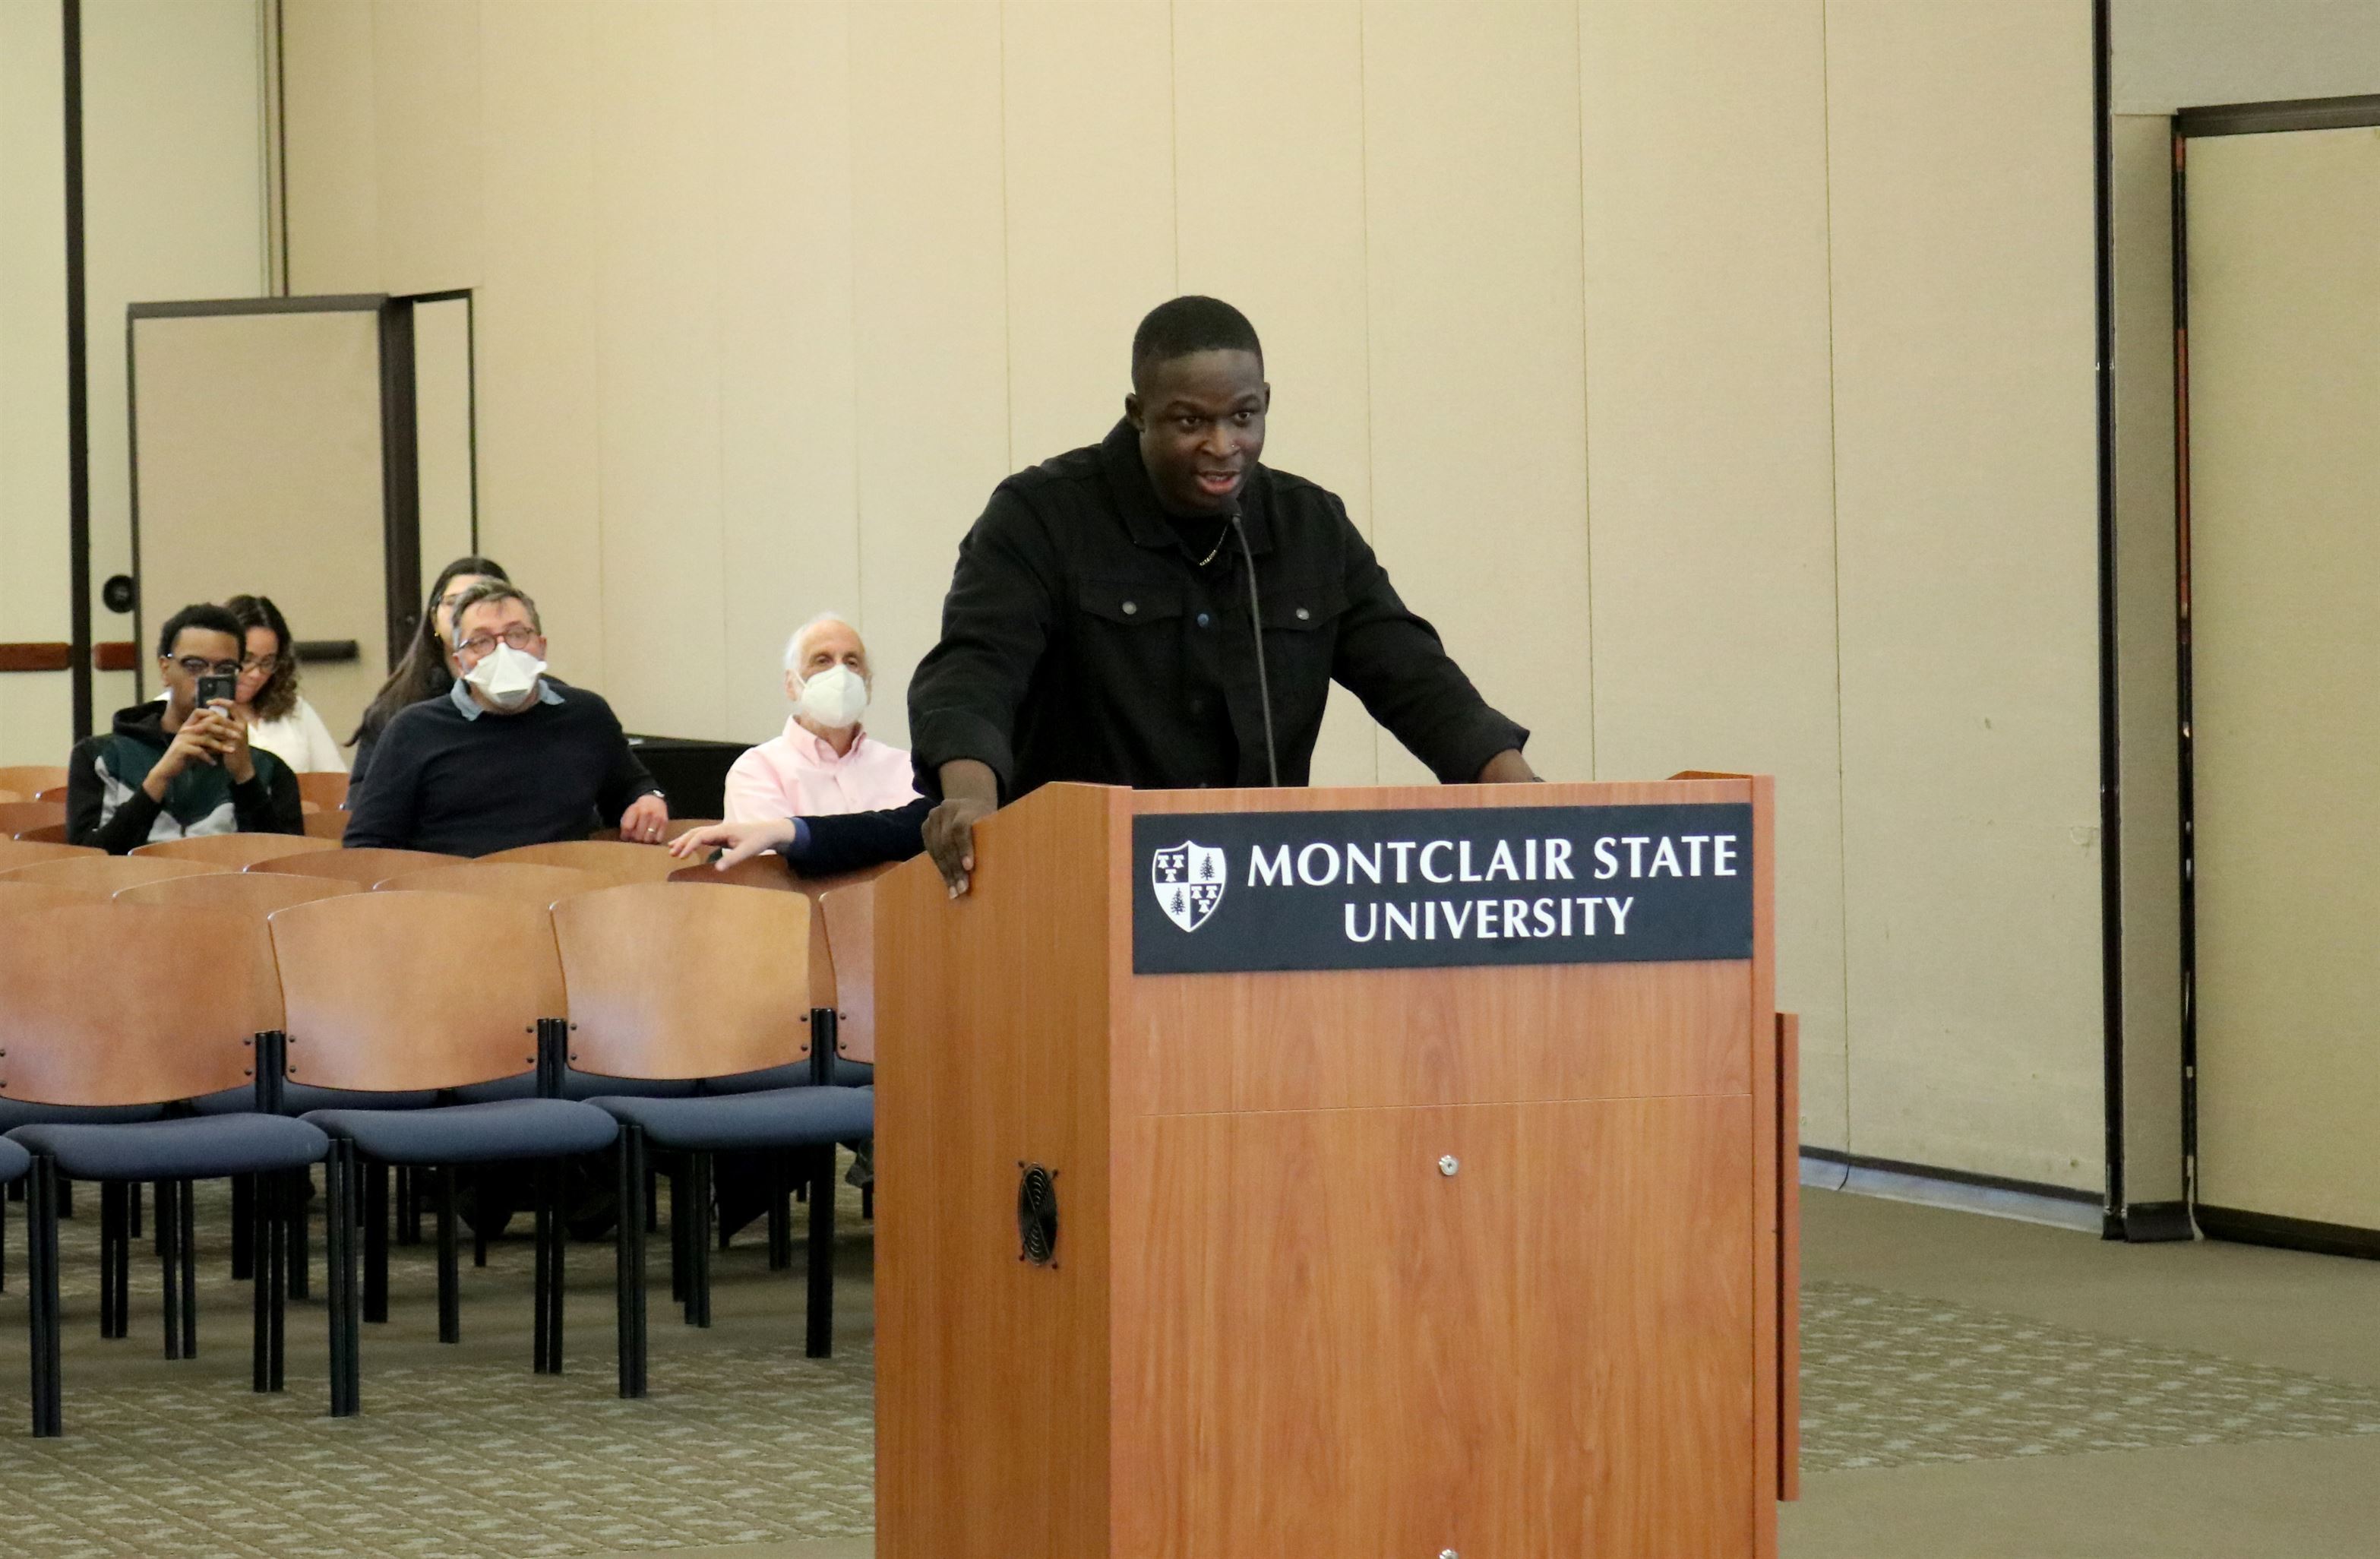 James Olatunji hopes tuition won't increase greatly. He thinks the state does not fund Montclair State sufficiently.